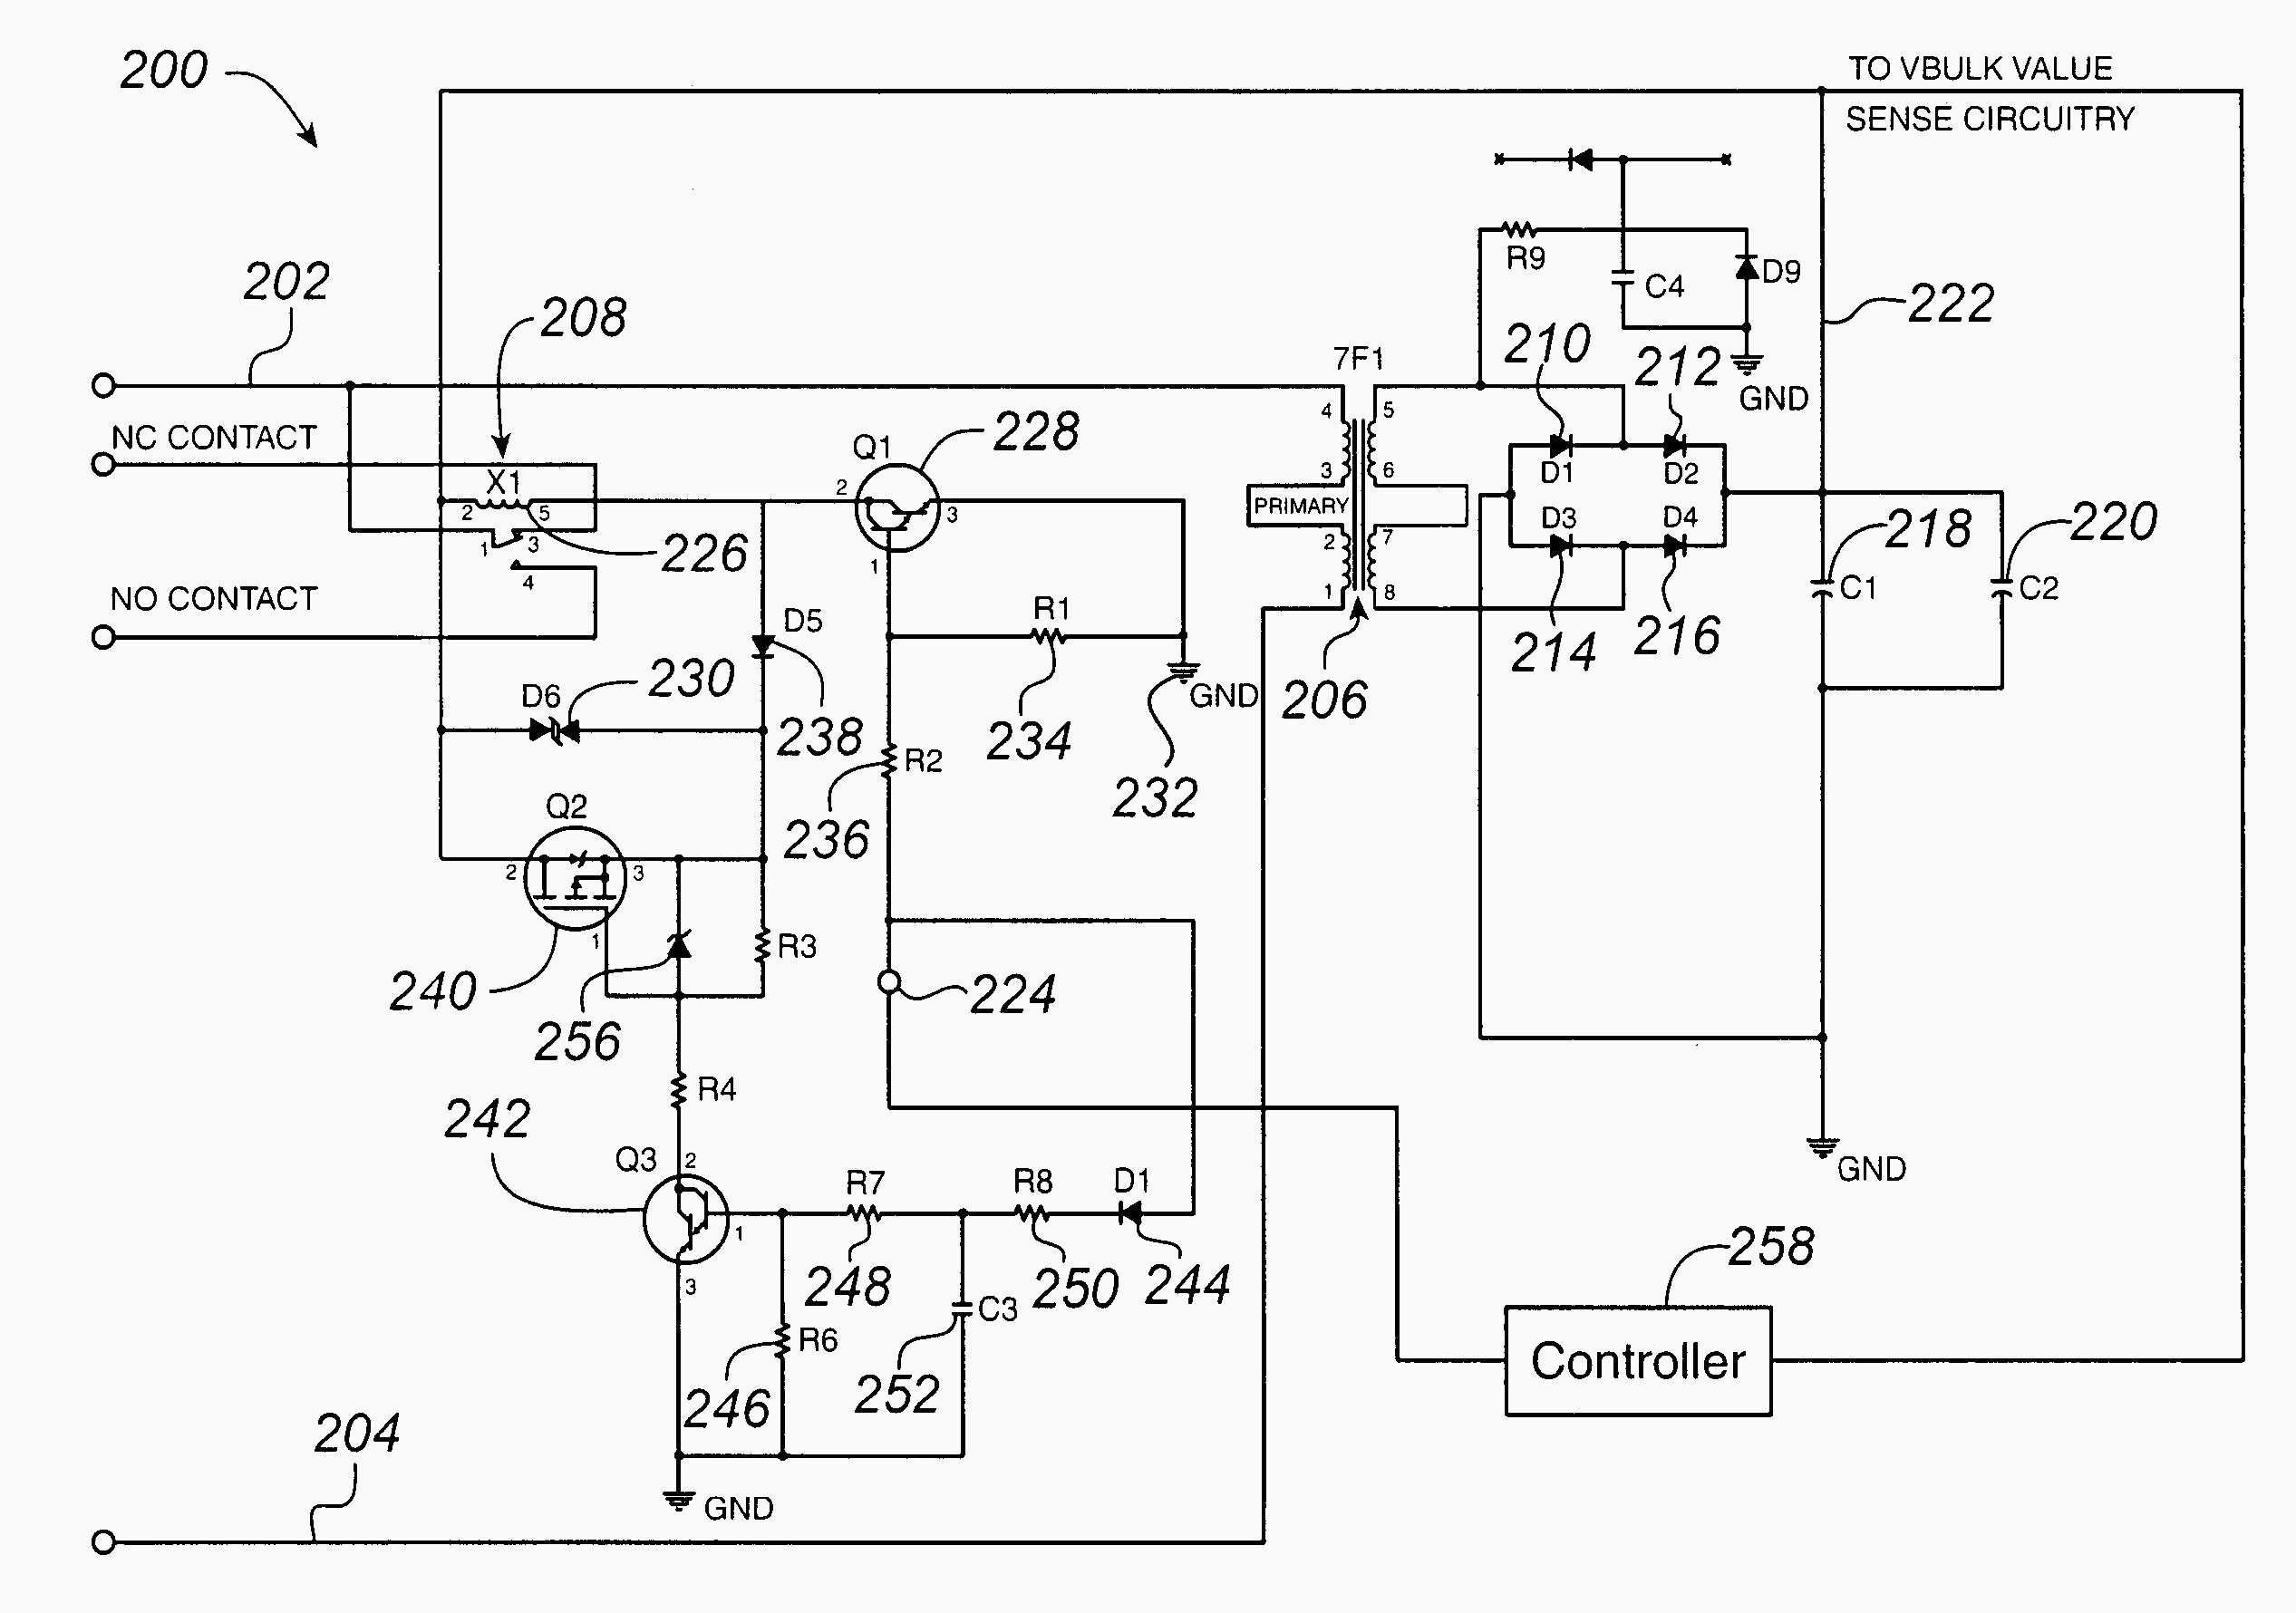 piping diagram for walk in cooler data wiring diagram today Wiring Freezer in Diagram Reach Chd 25 piping diagram for walk in cooler data wiring diagram